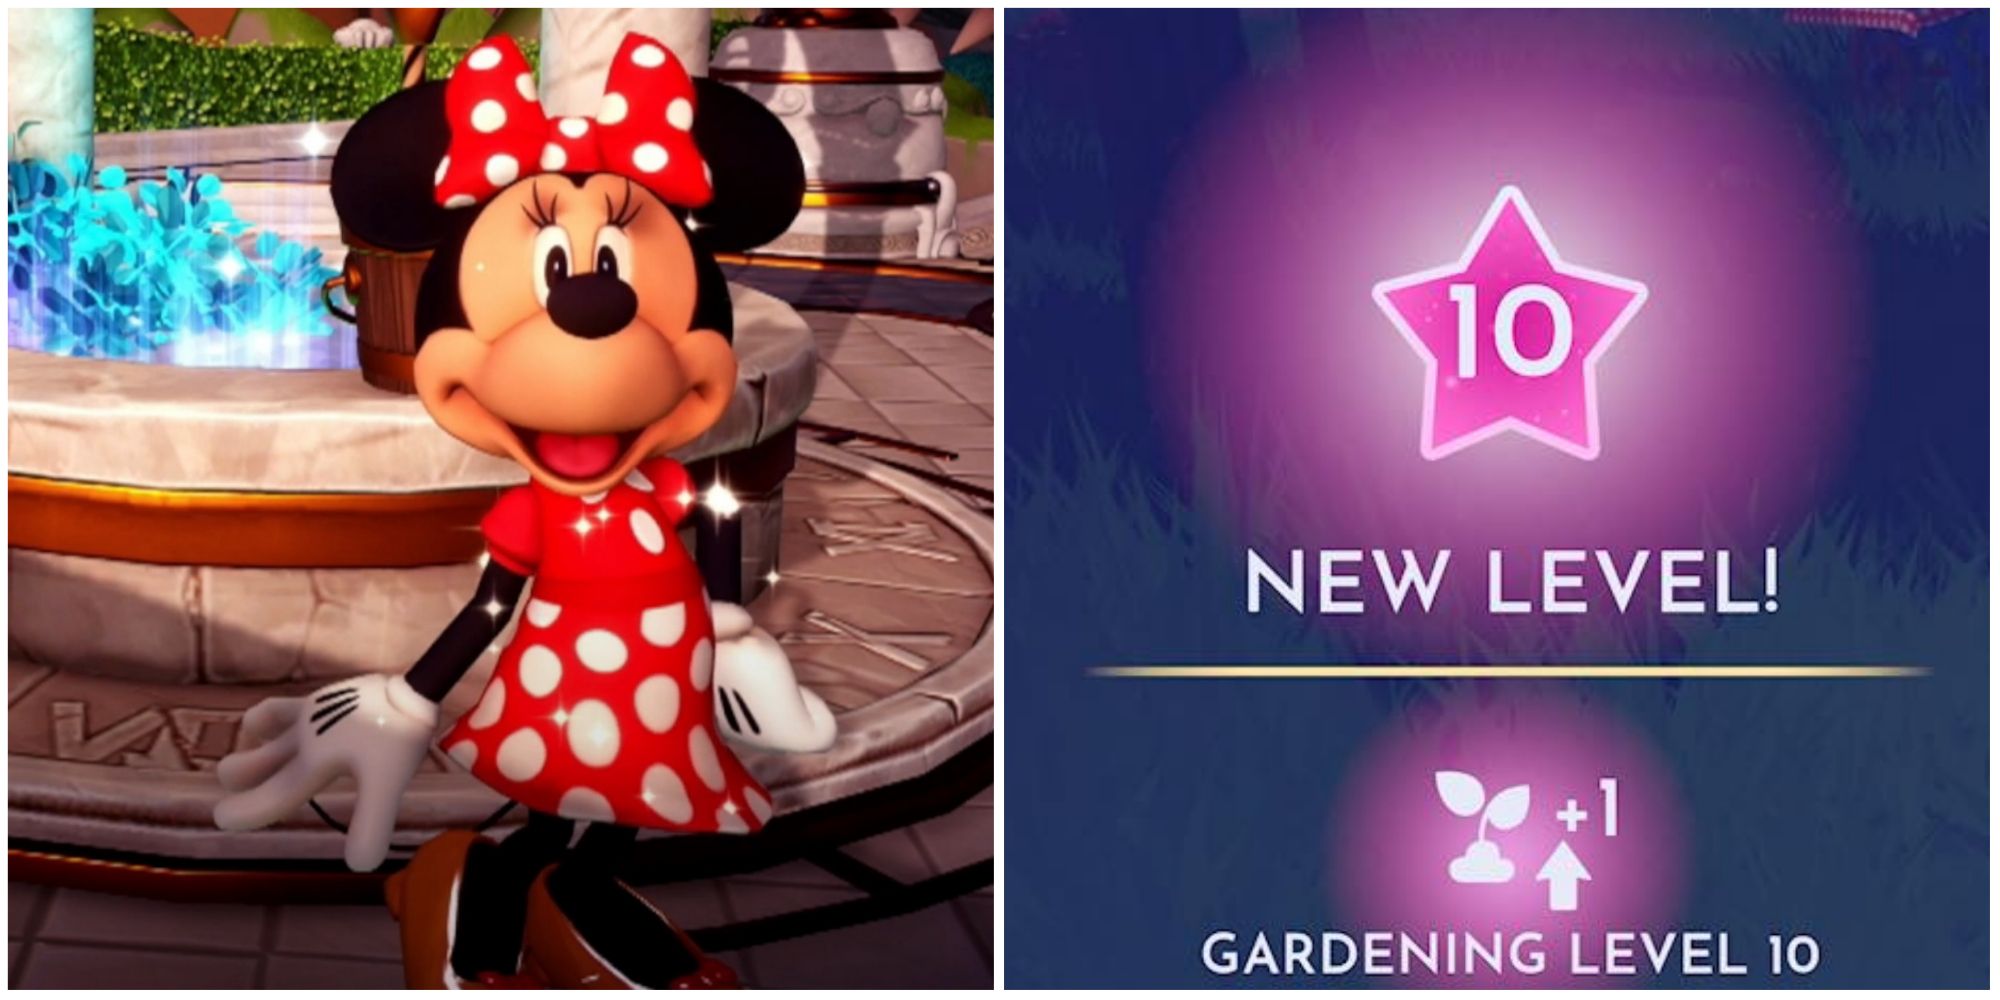 reaching maximum friendship with minnie mouse in disney dreamlight valley